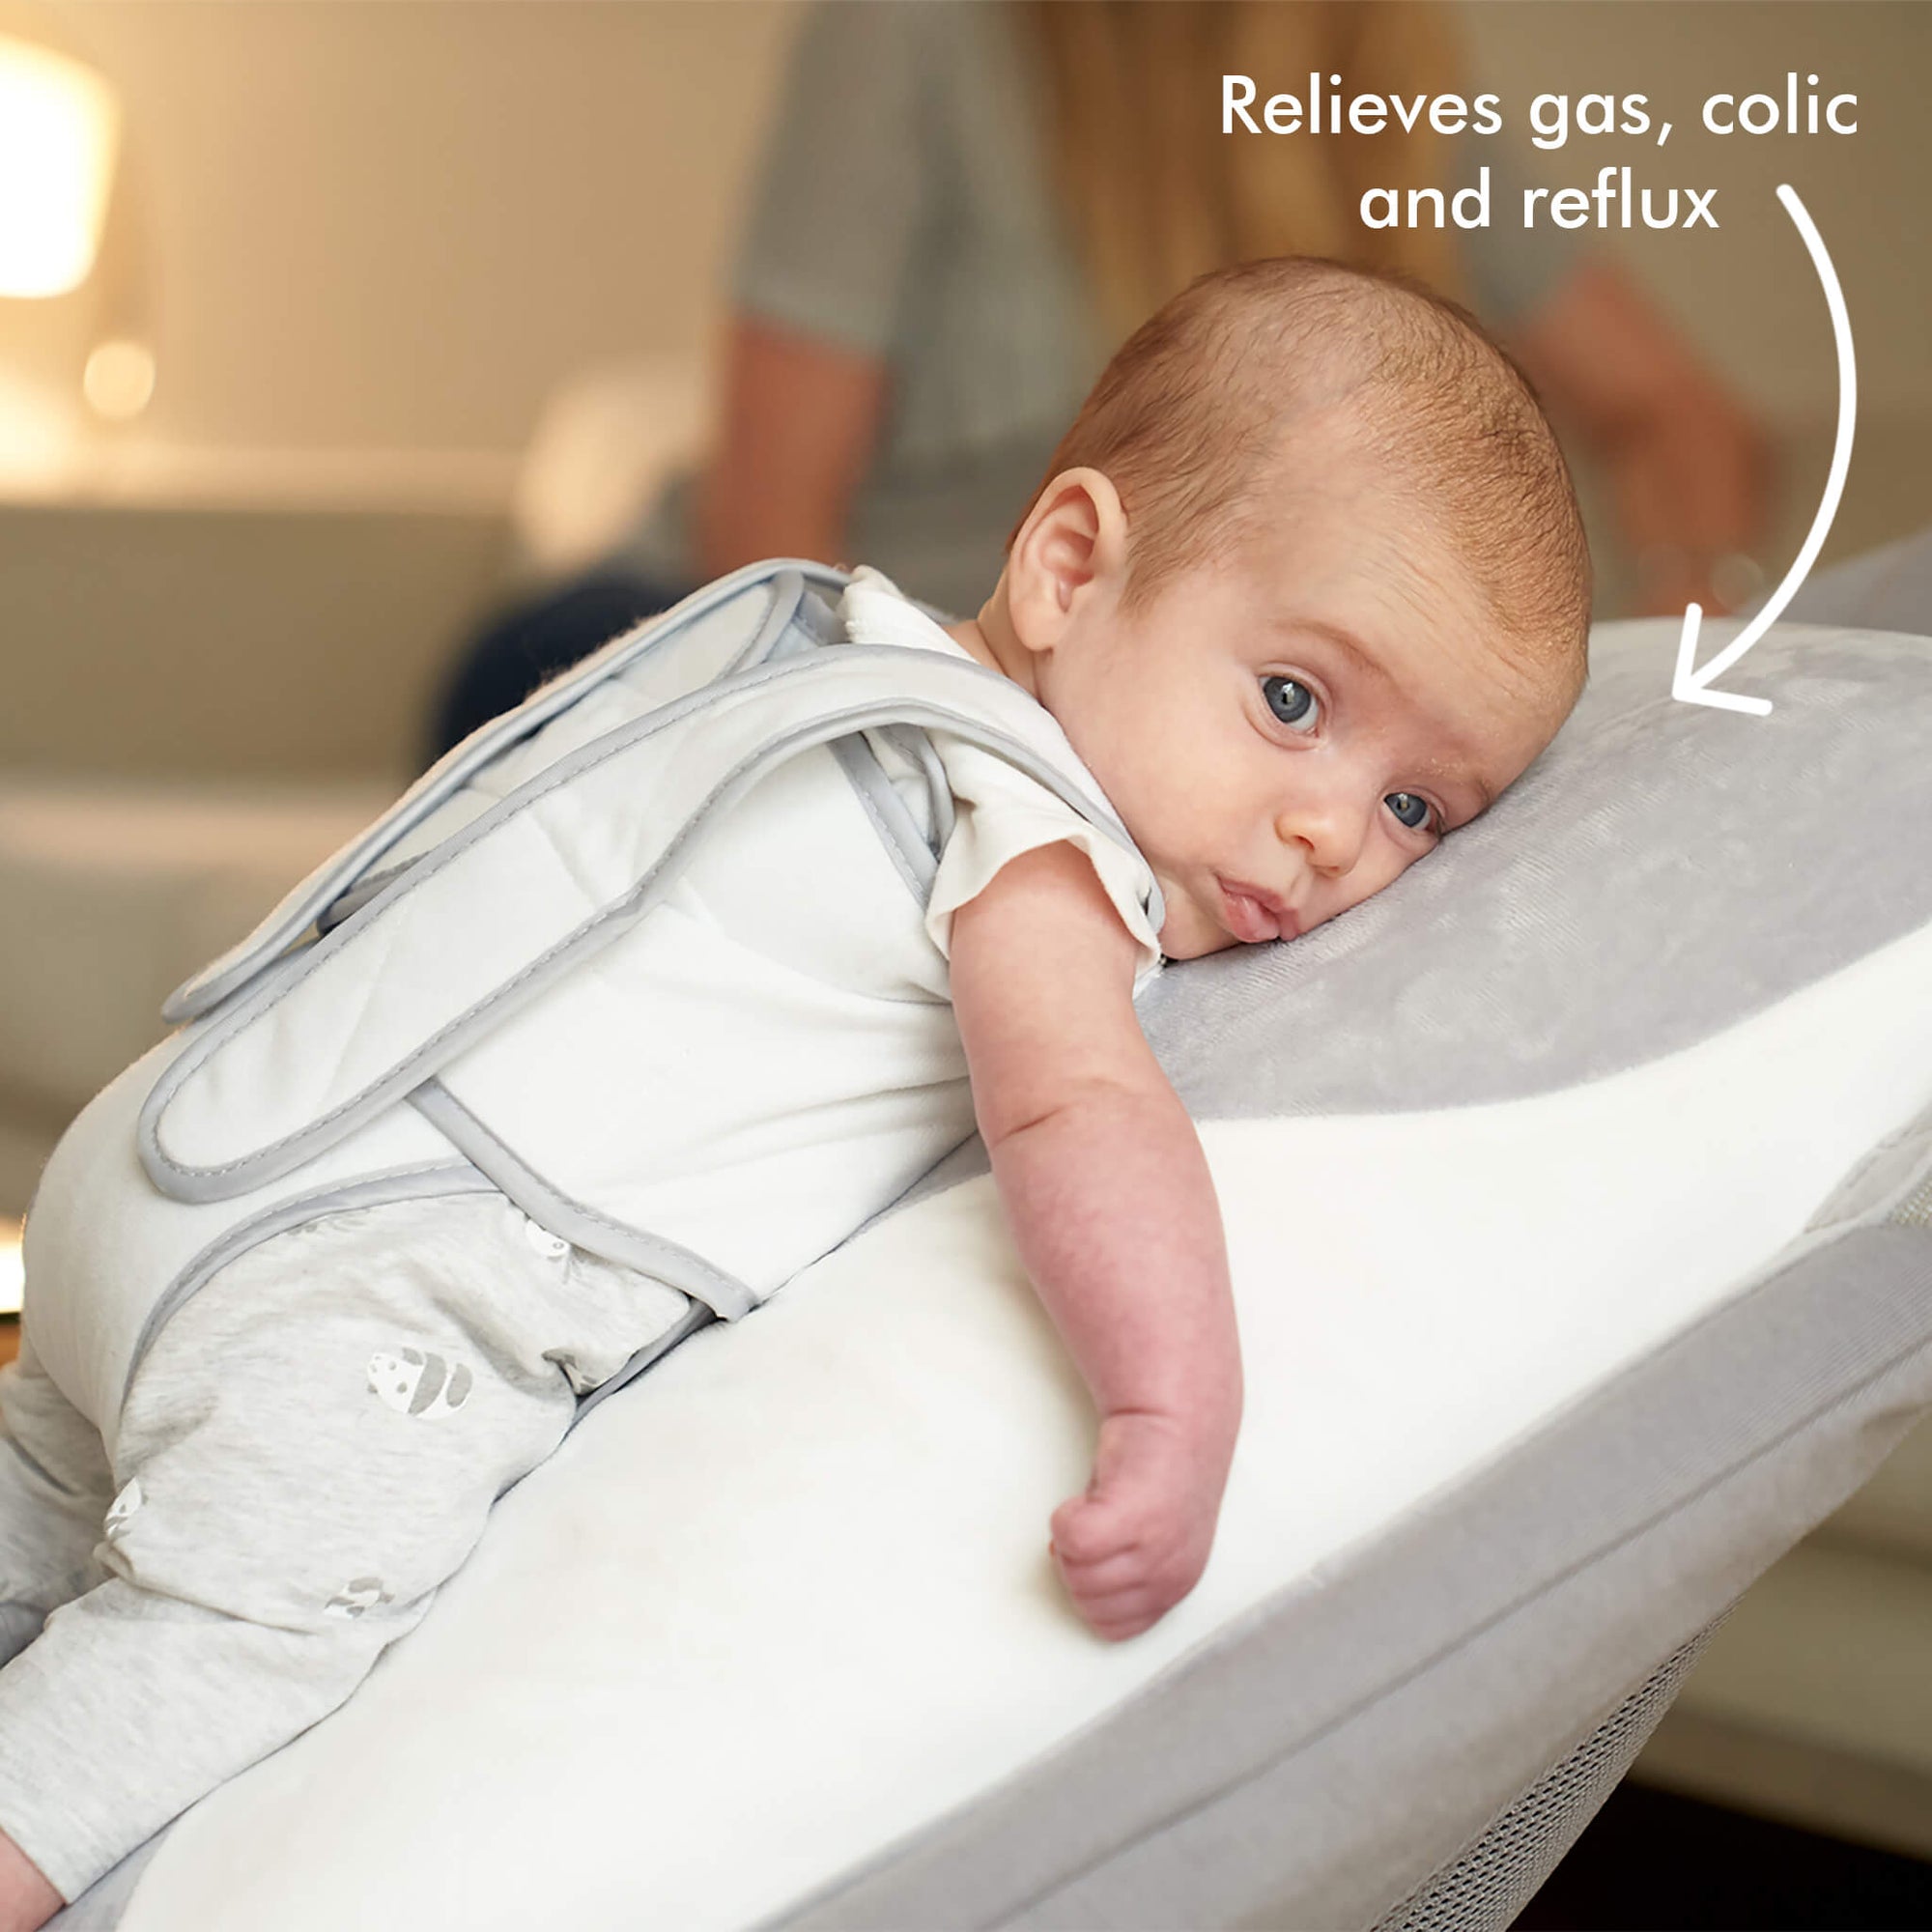 Babocush helps relieve gas, colic and reflux